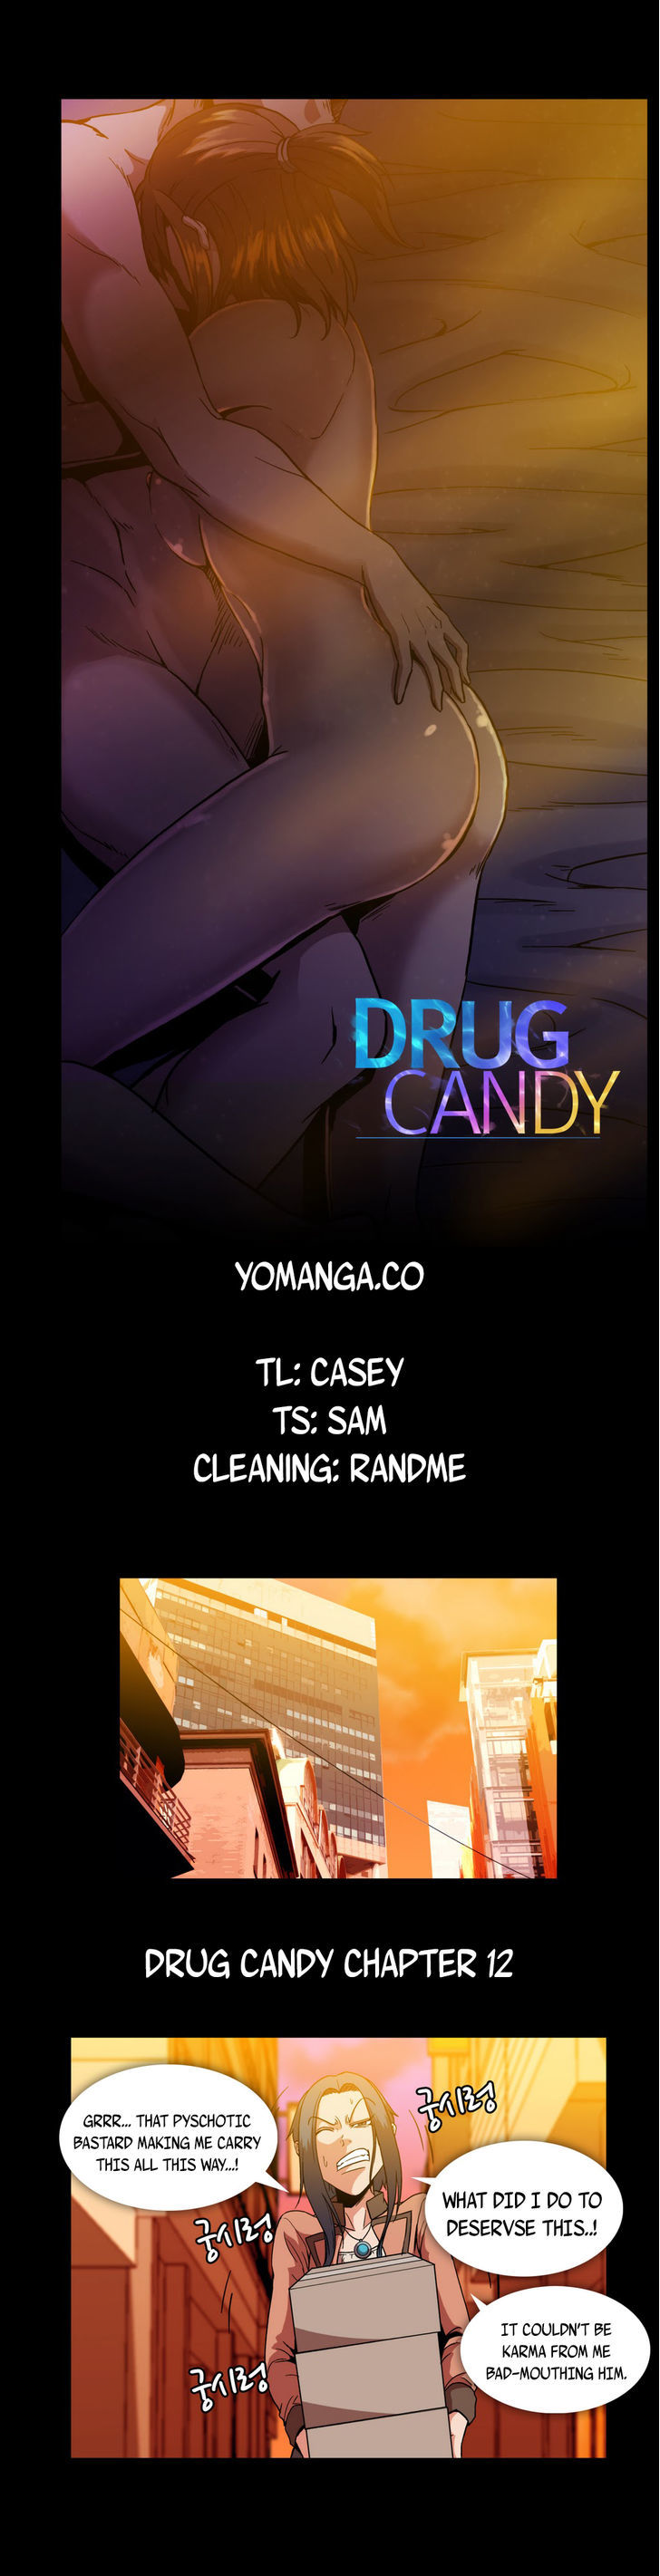 Drug Candy - Chapter 12 Page 1